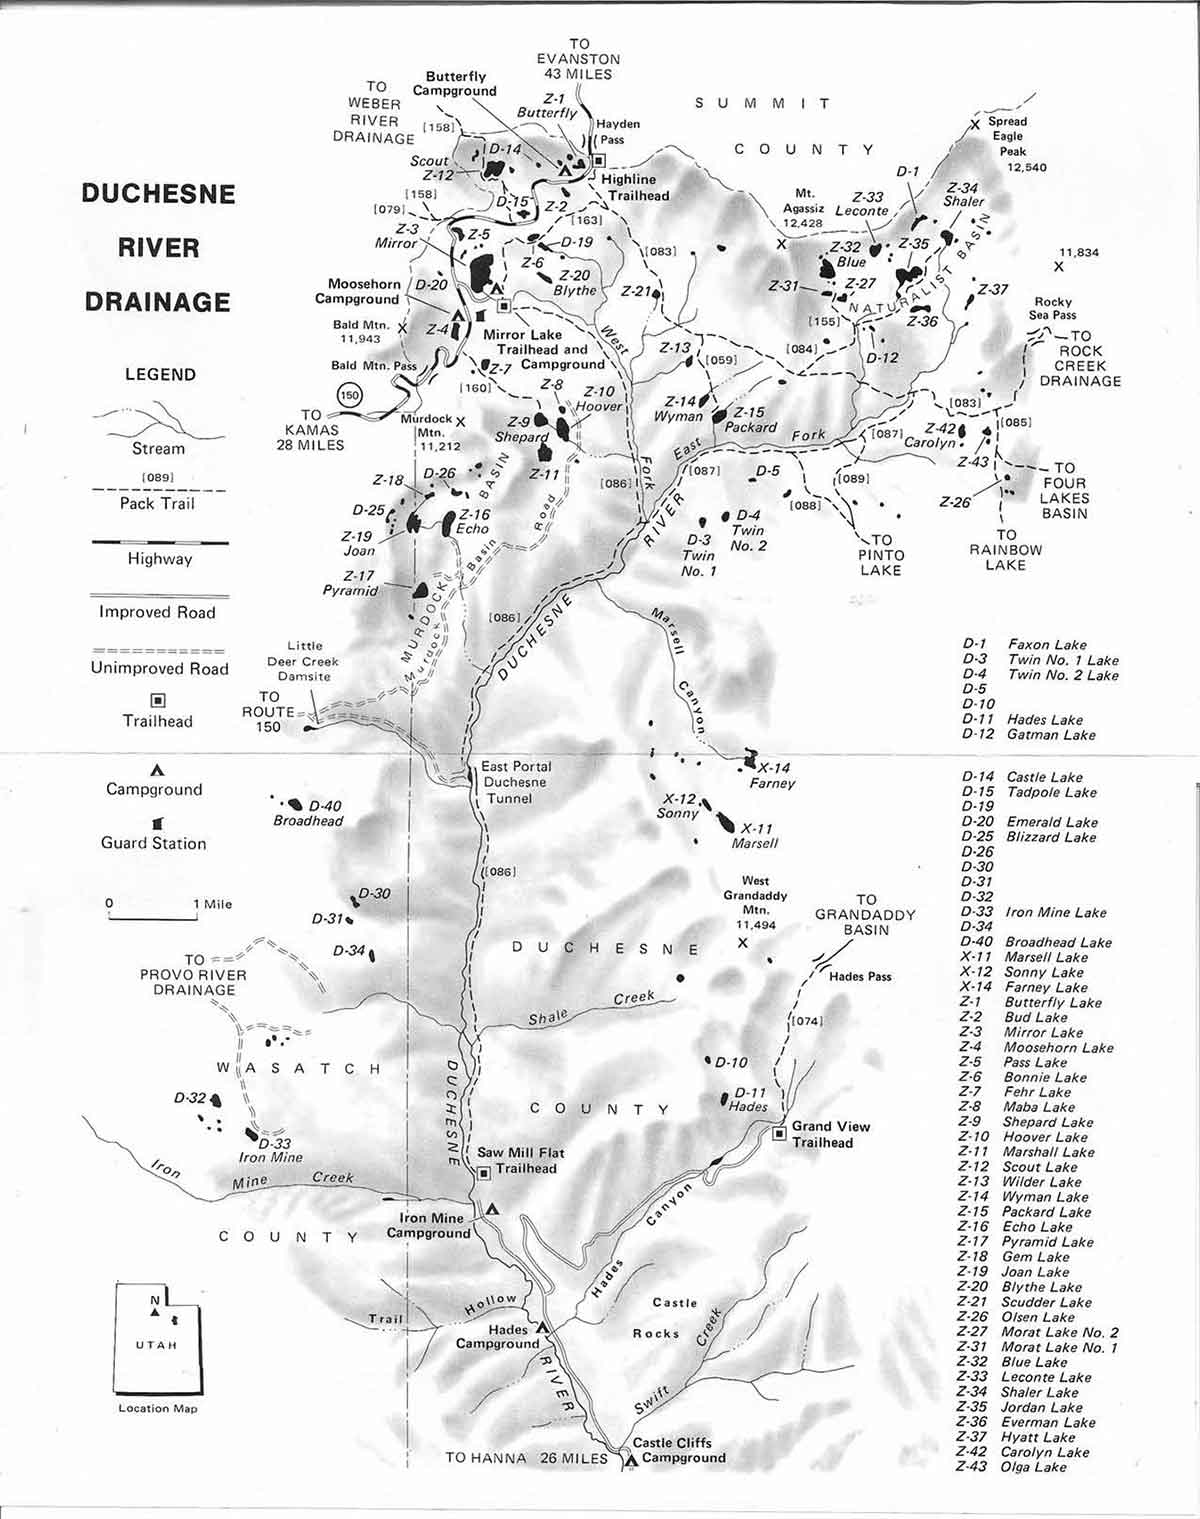 Map of the Duchesne River drainage in the Uinta mountains.